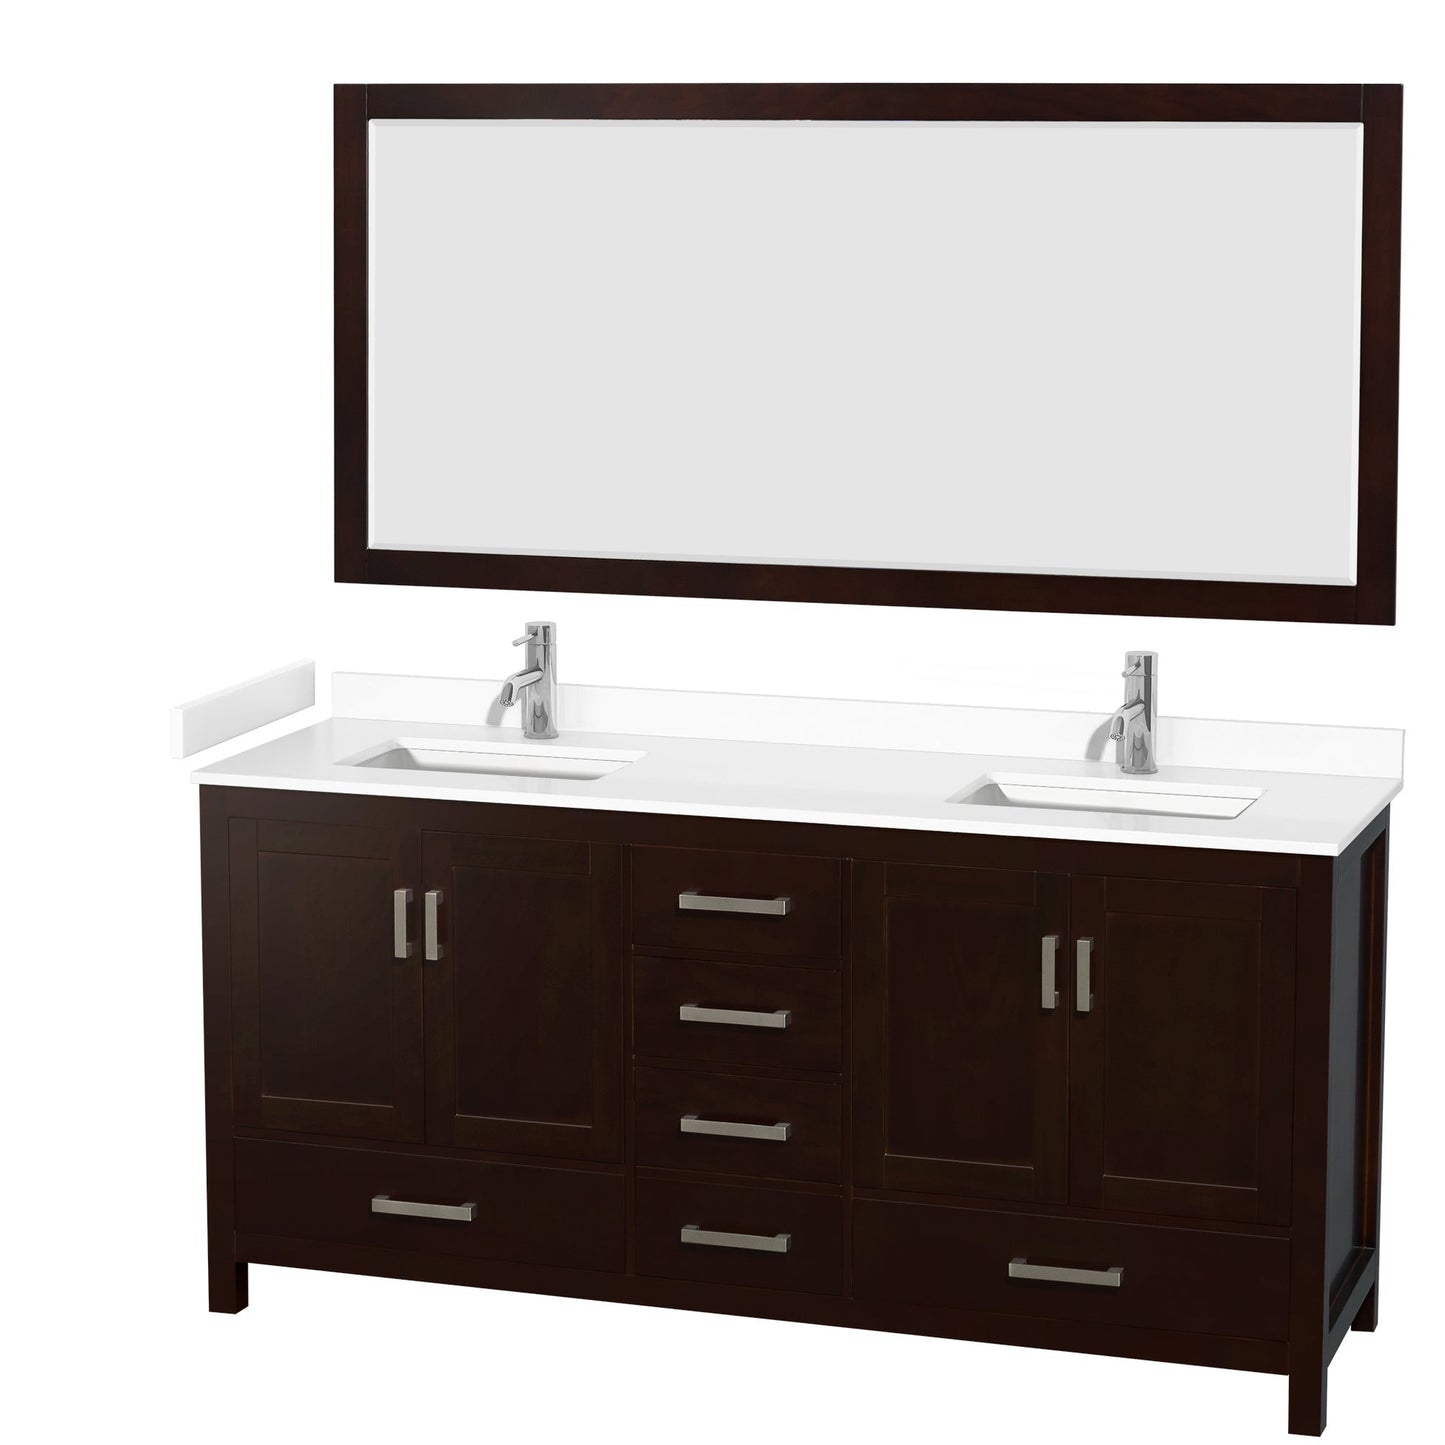 Wyndham Collection Sheffield 72" Double Bathroom Vanity in Espresso, White Cultured Marble Countertop, Undermount Square Sinks, 70" Mirror